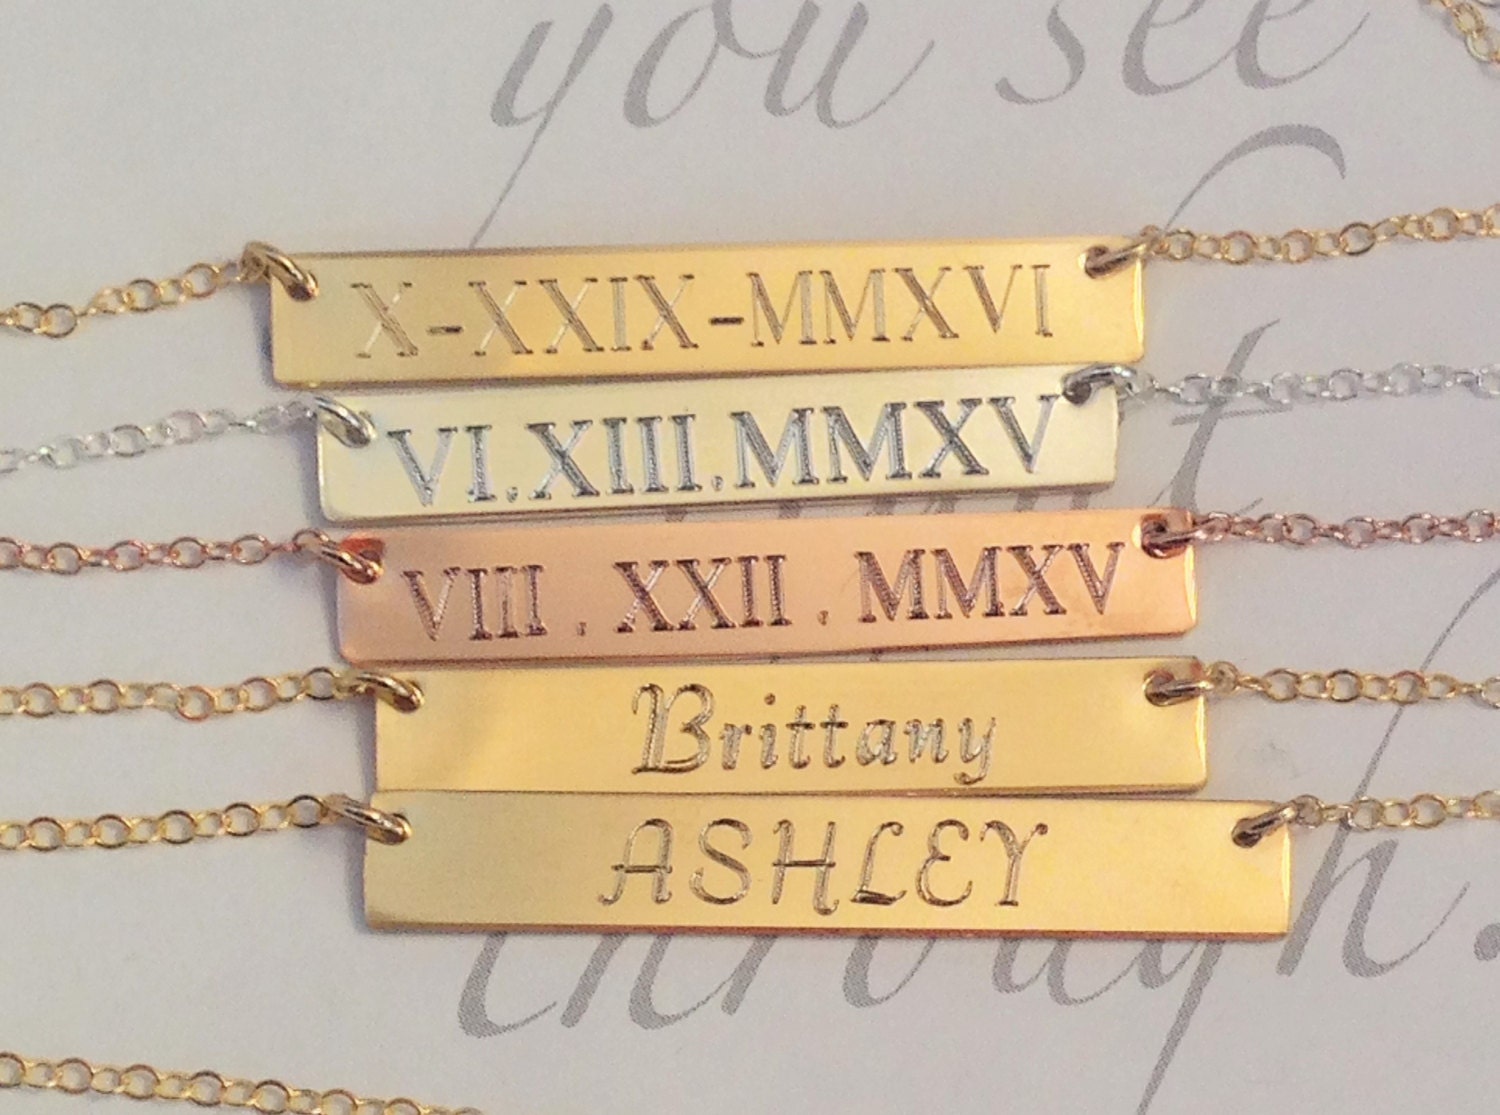 Bar Necklace personalized name engraved Gold Bar necklace Bar Necklace Initial Necklace Heart charm Gold Fill Rose Gold, Dainty Bar